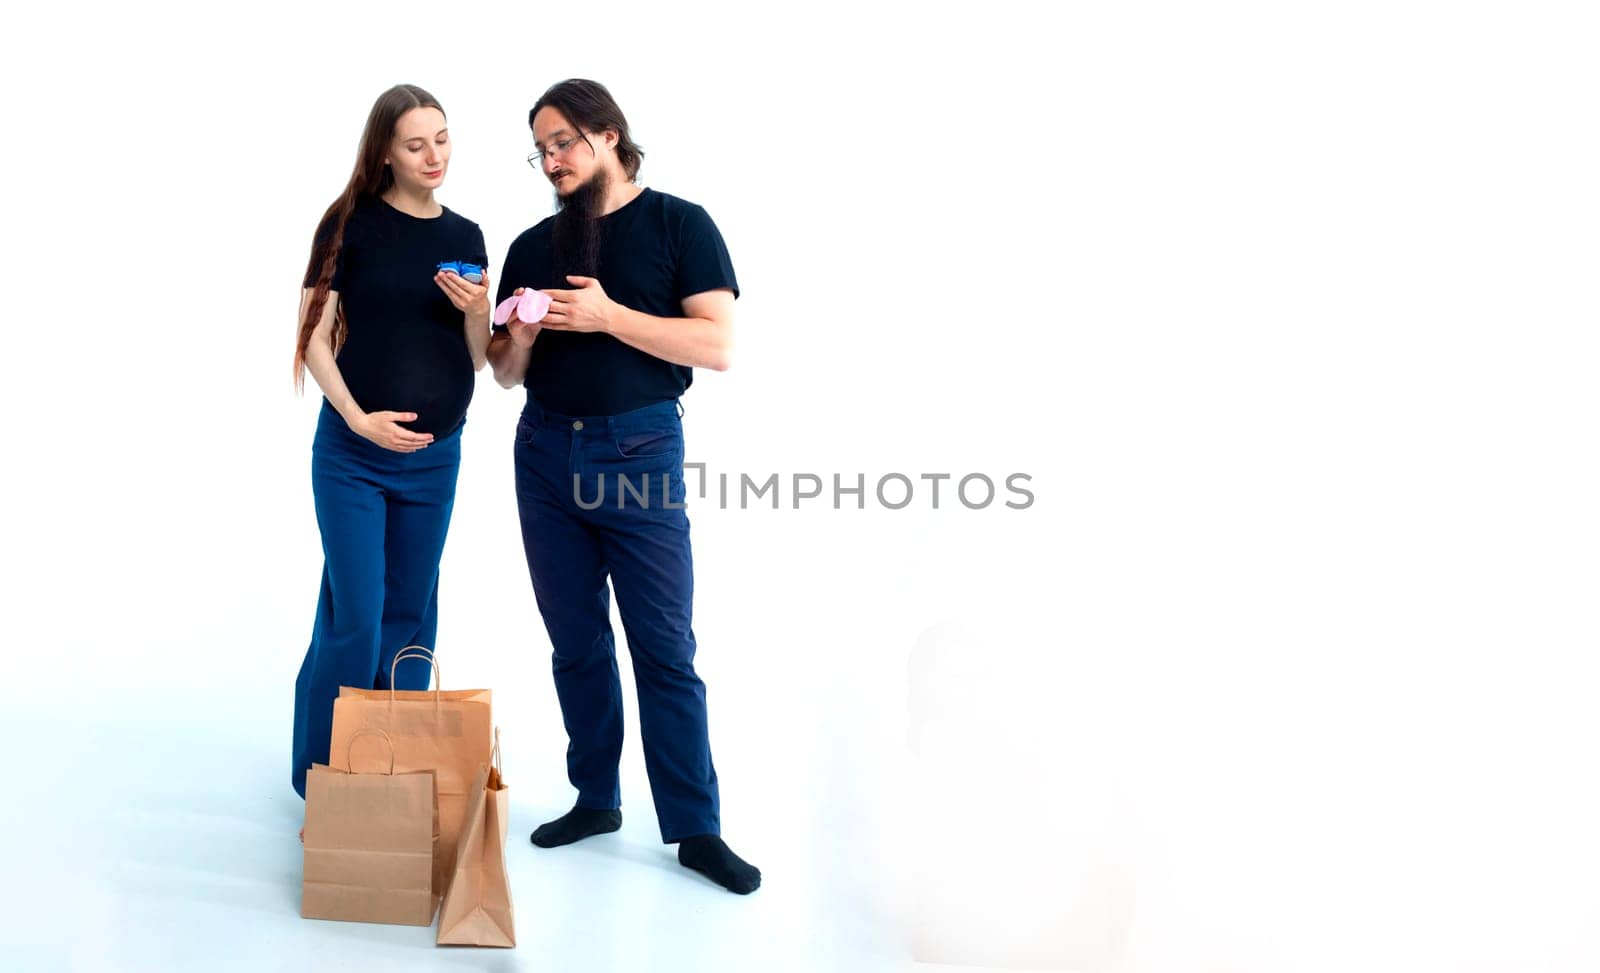 young pregnant woman and her husband with shopping bags andchoose blue for a boy or pink for a girl on white background. Pregnancy shopping concept happy young family with shopping bags